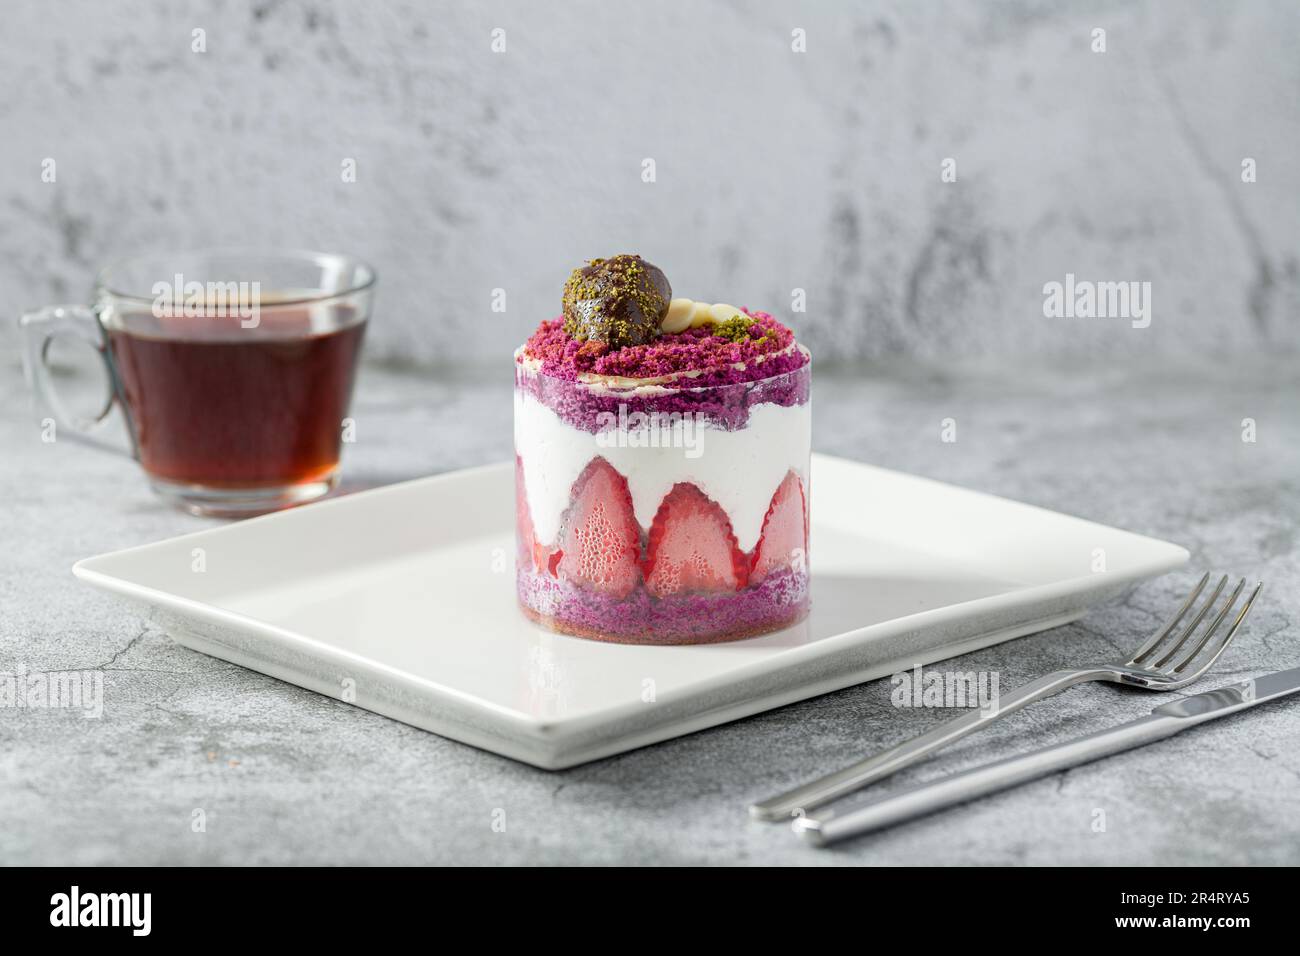 Strawberry shortcake with tea on a white porcelain plate Stock Photo